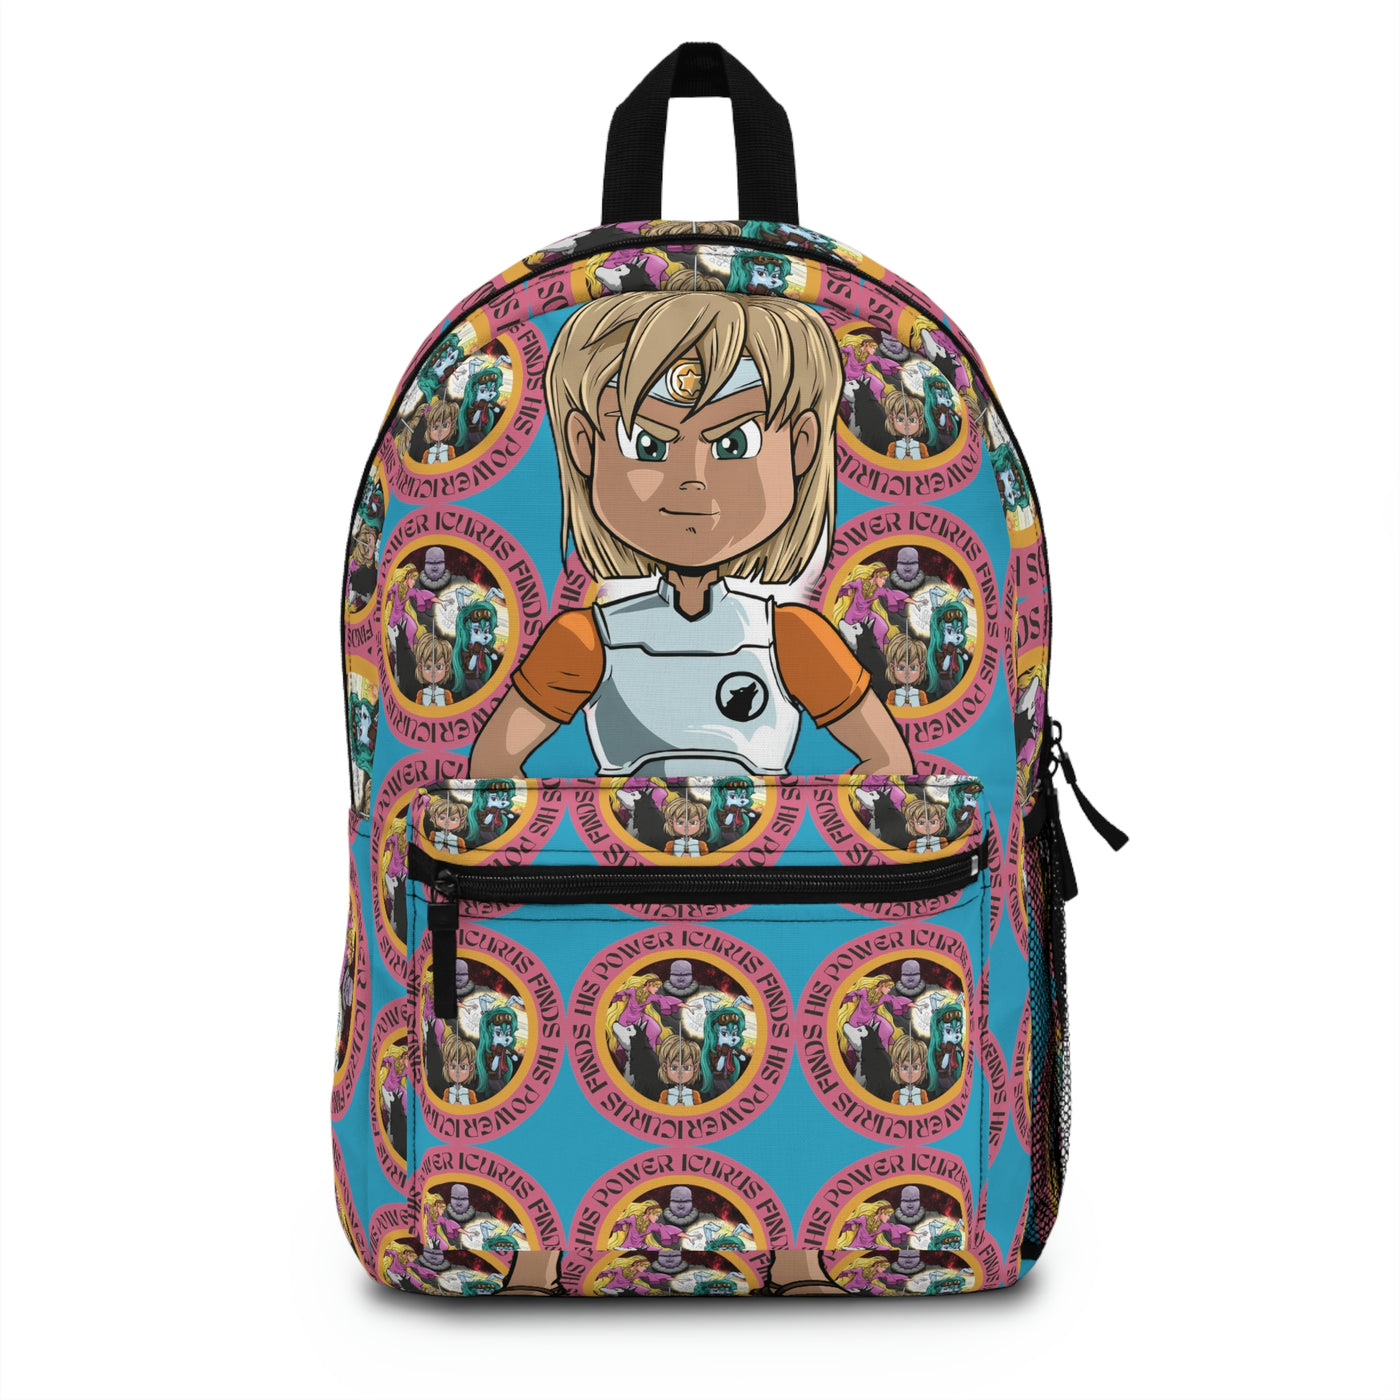 Icurus Finds His Power Turquoise Backpack